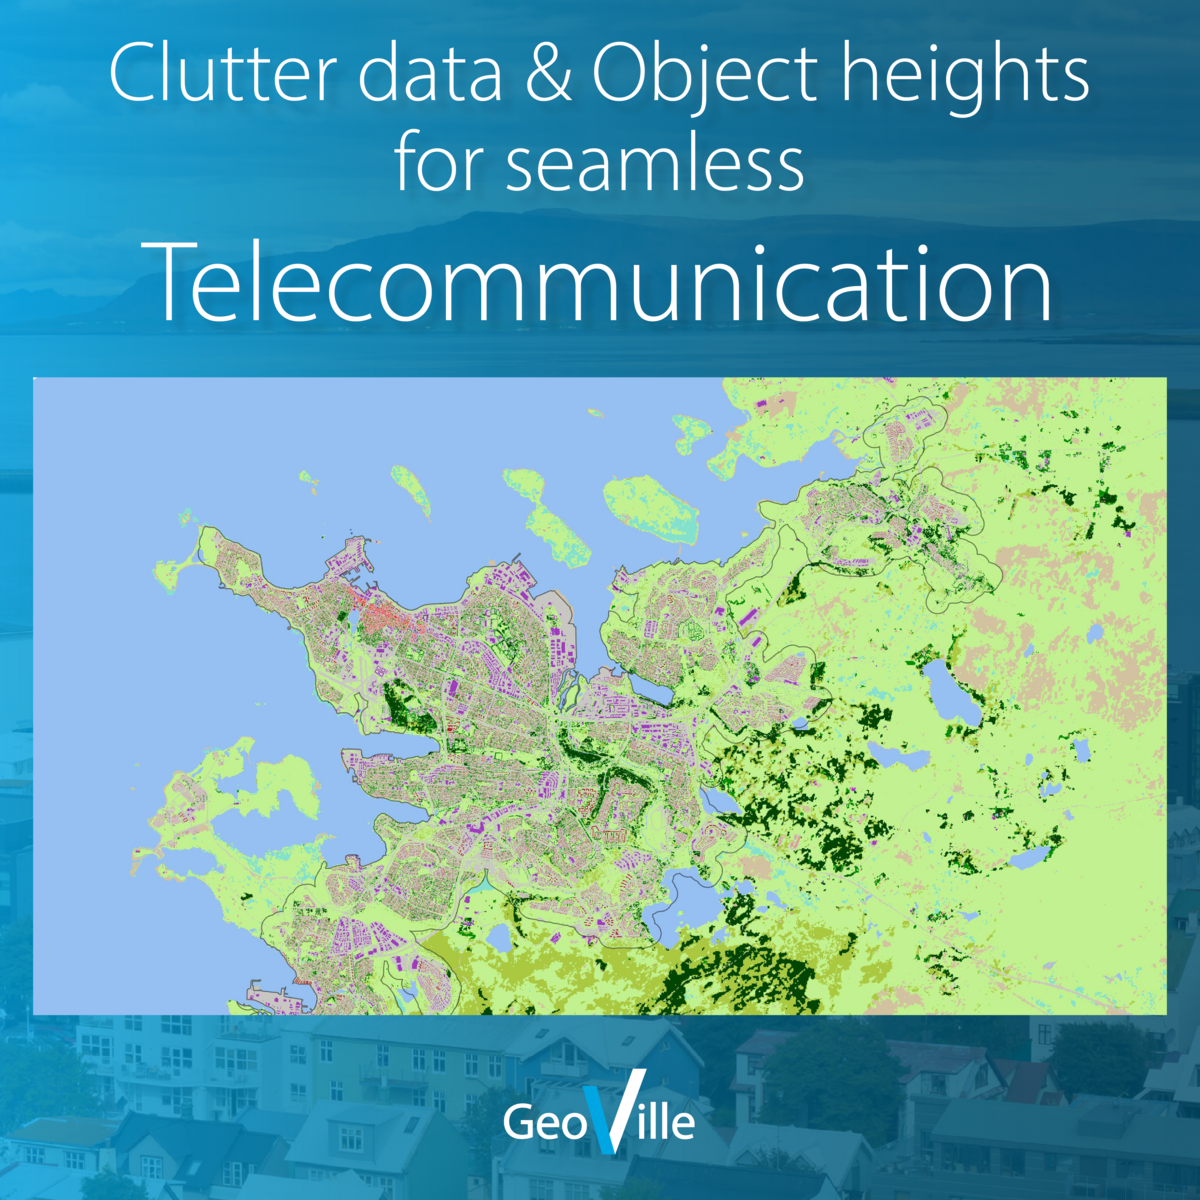 Classification of clutter data and object height for Icelandic telecommunications company